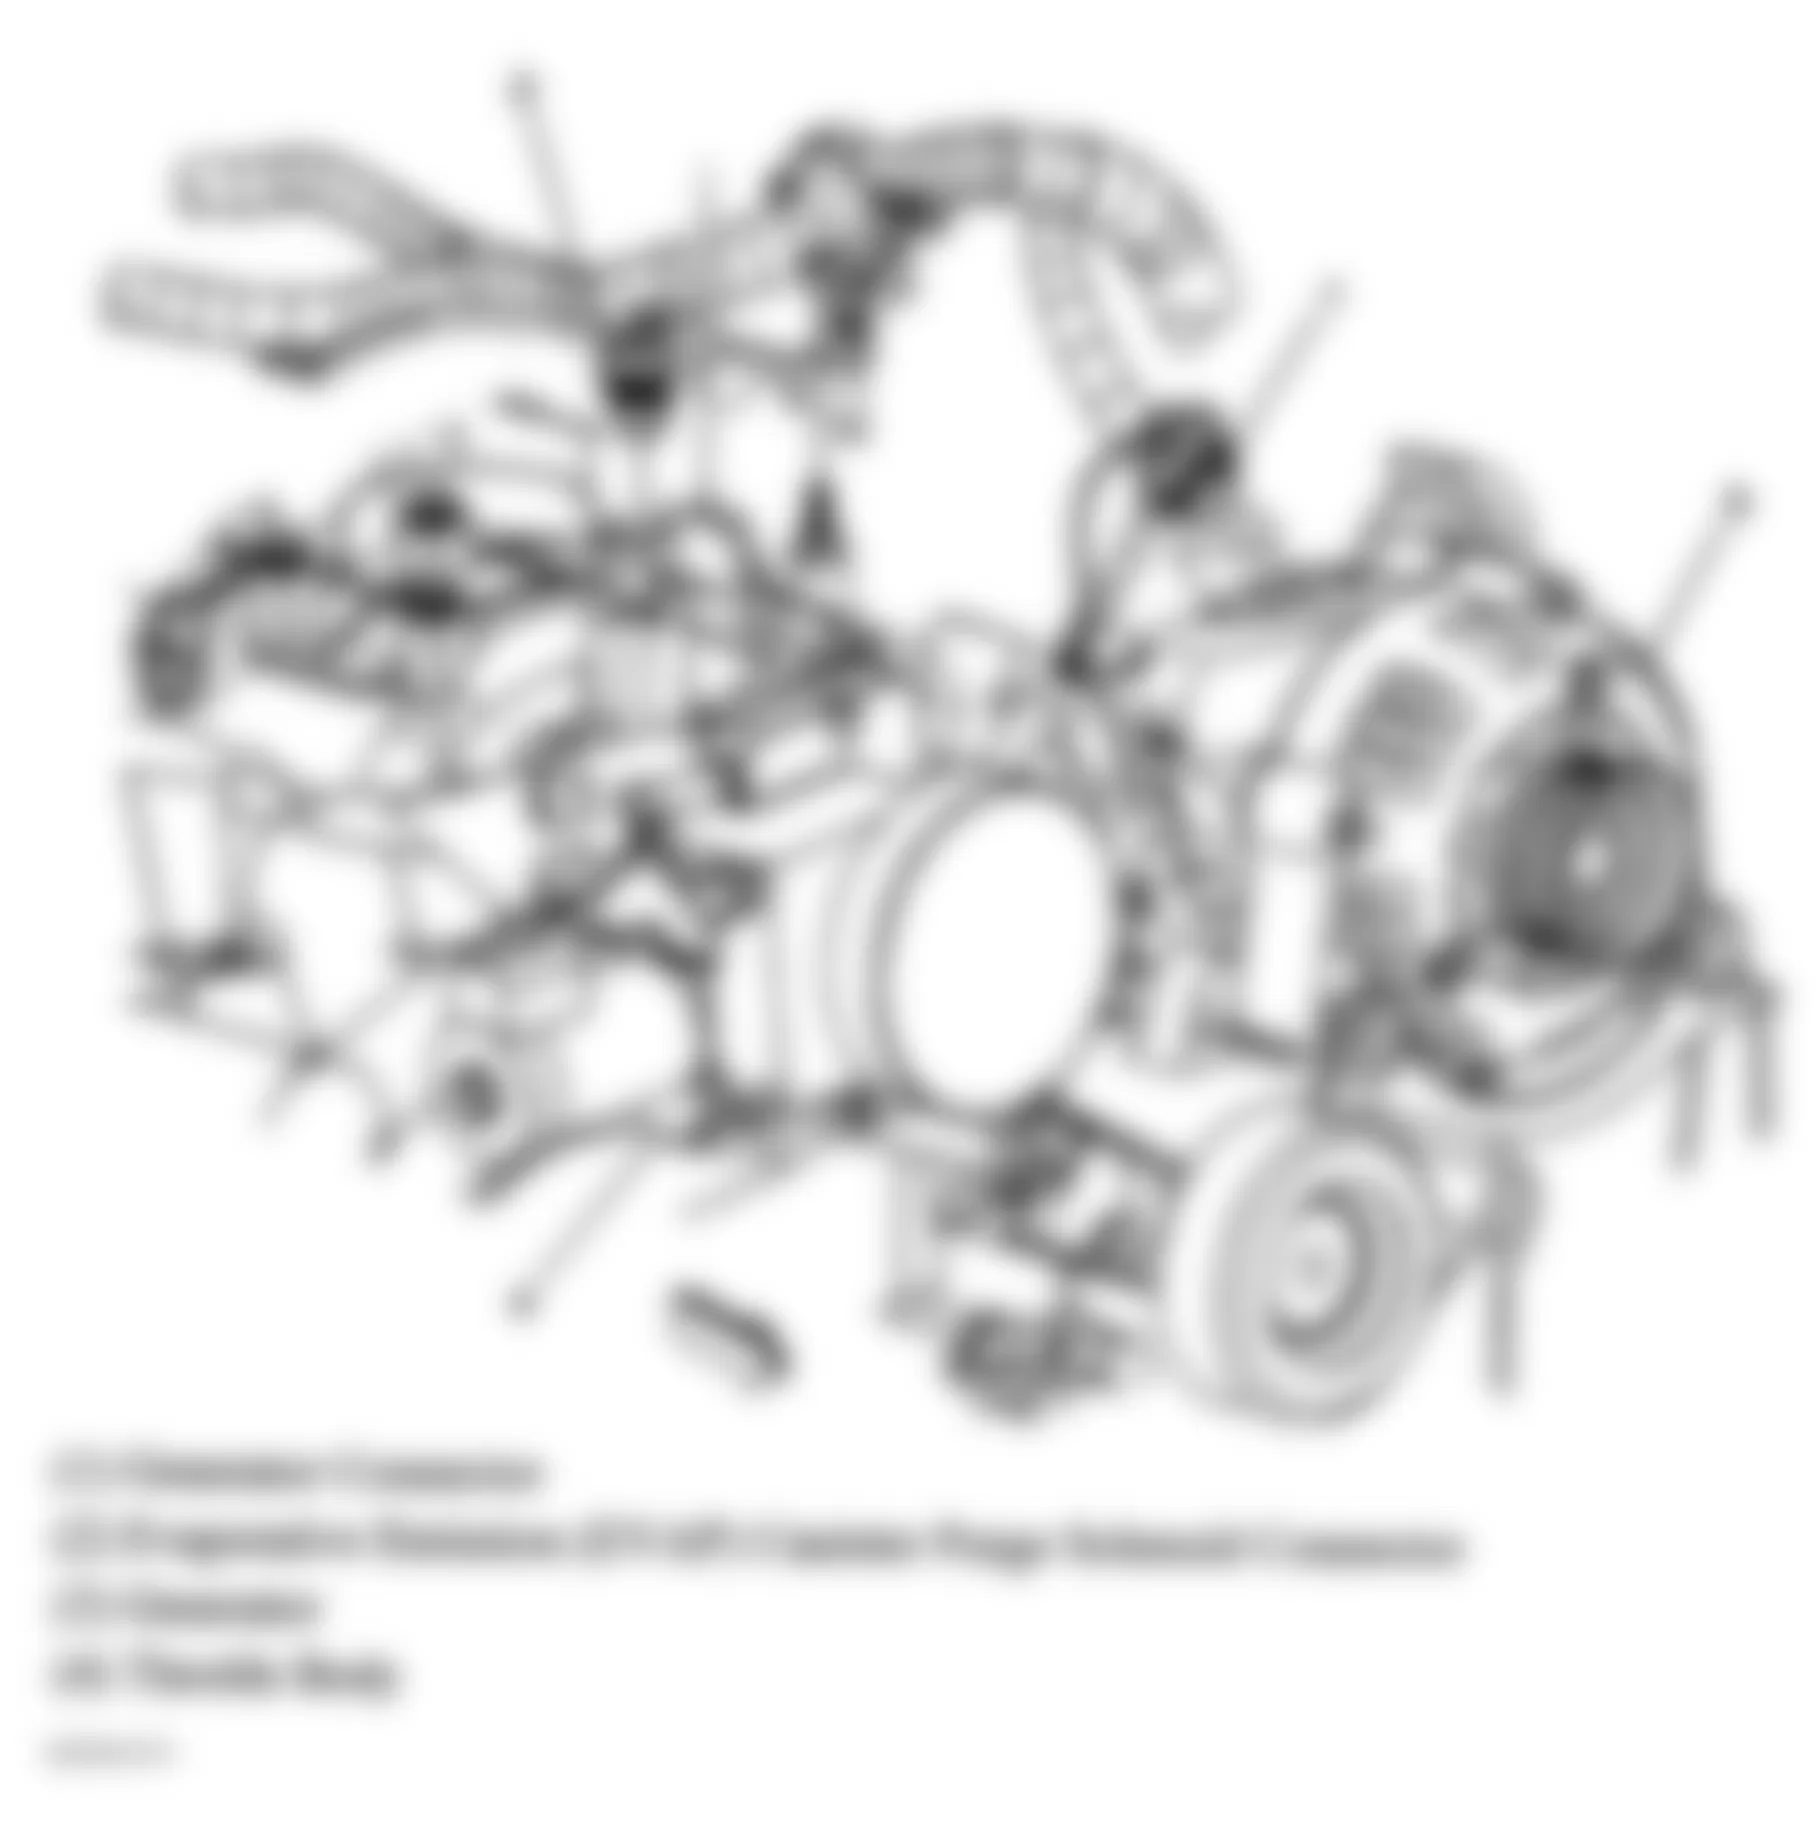 GMC Envoy XL 2005 - Component Locations -  Top Front Of Engine (5.3L)